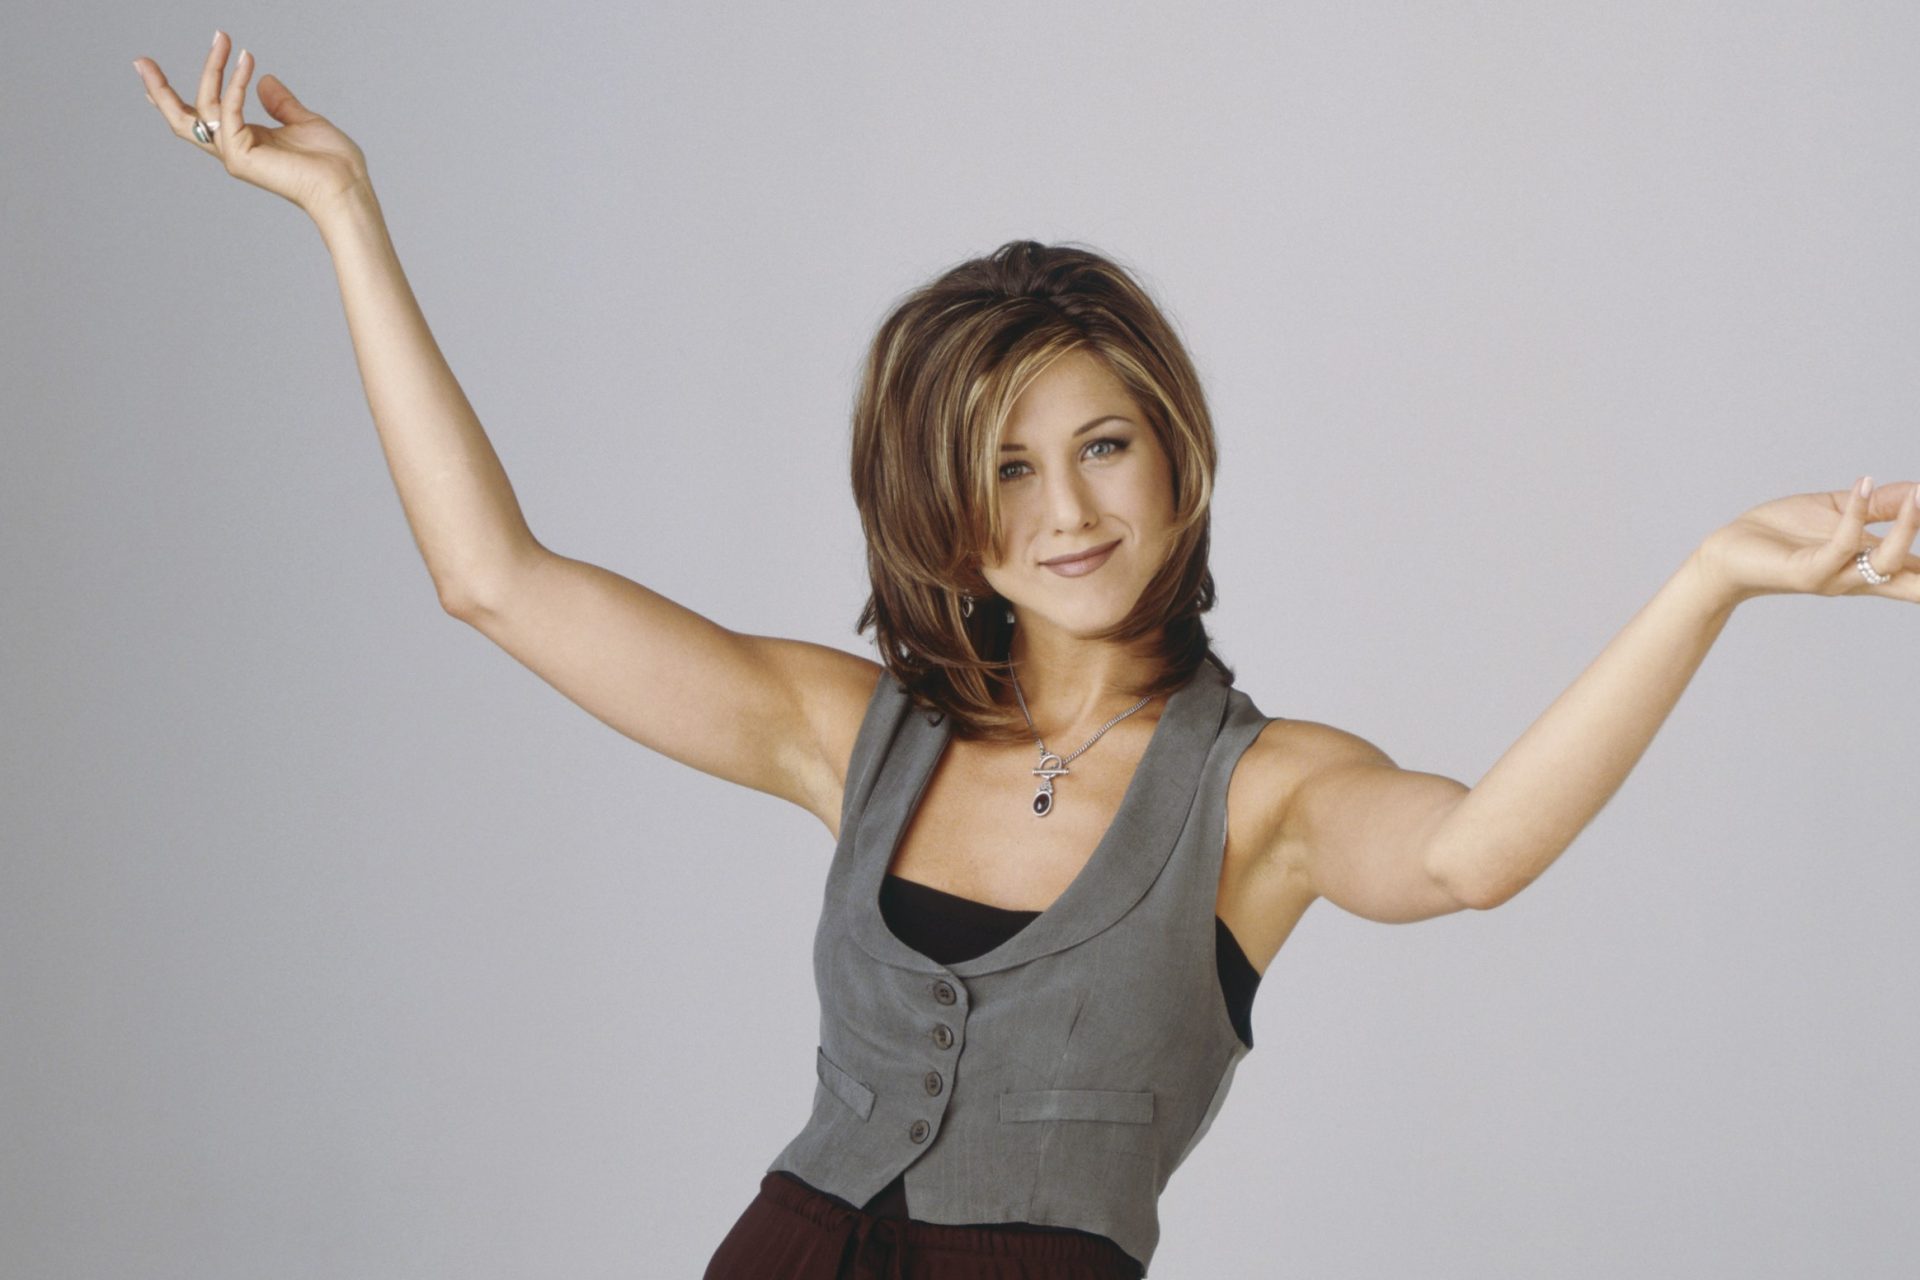 Jennifer Aniston before and after 'Friends'